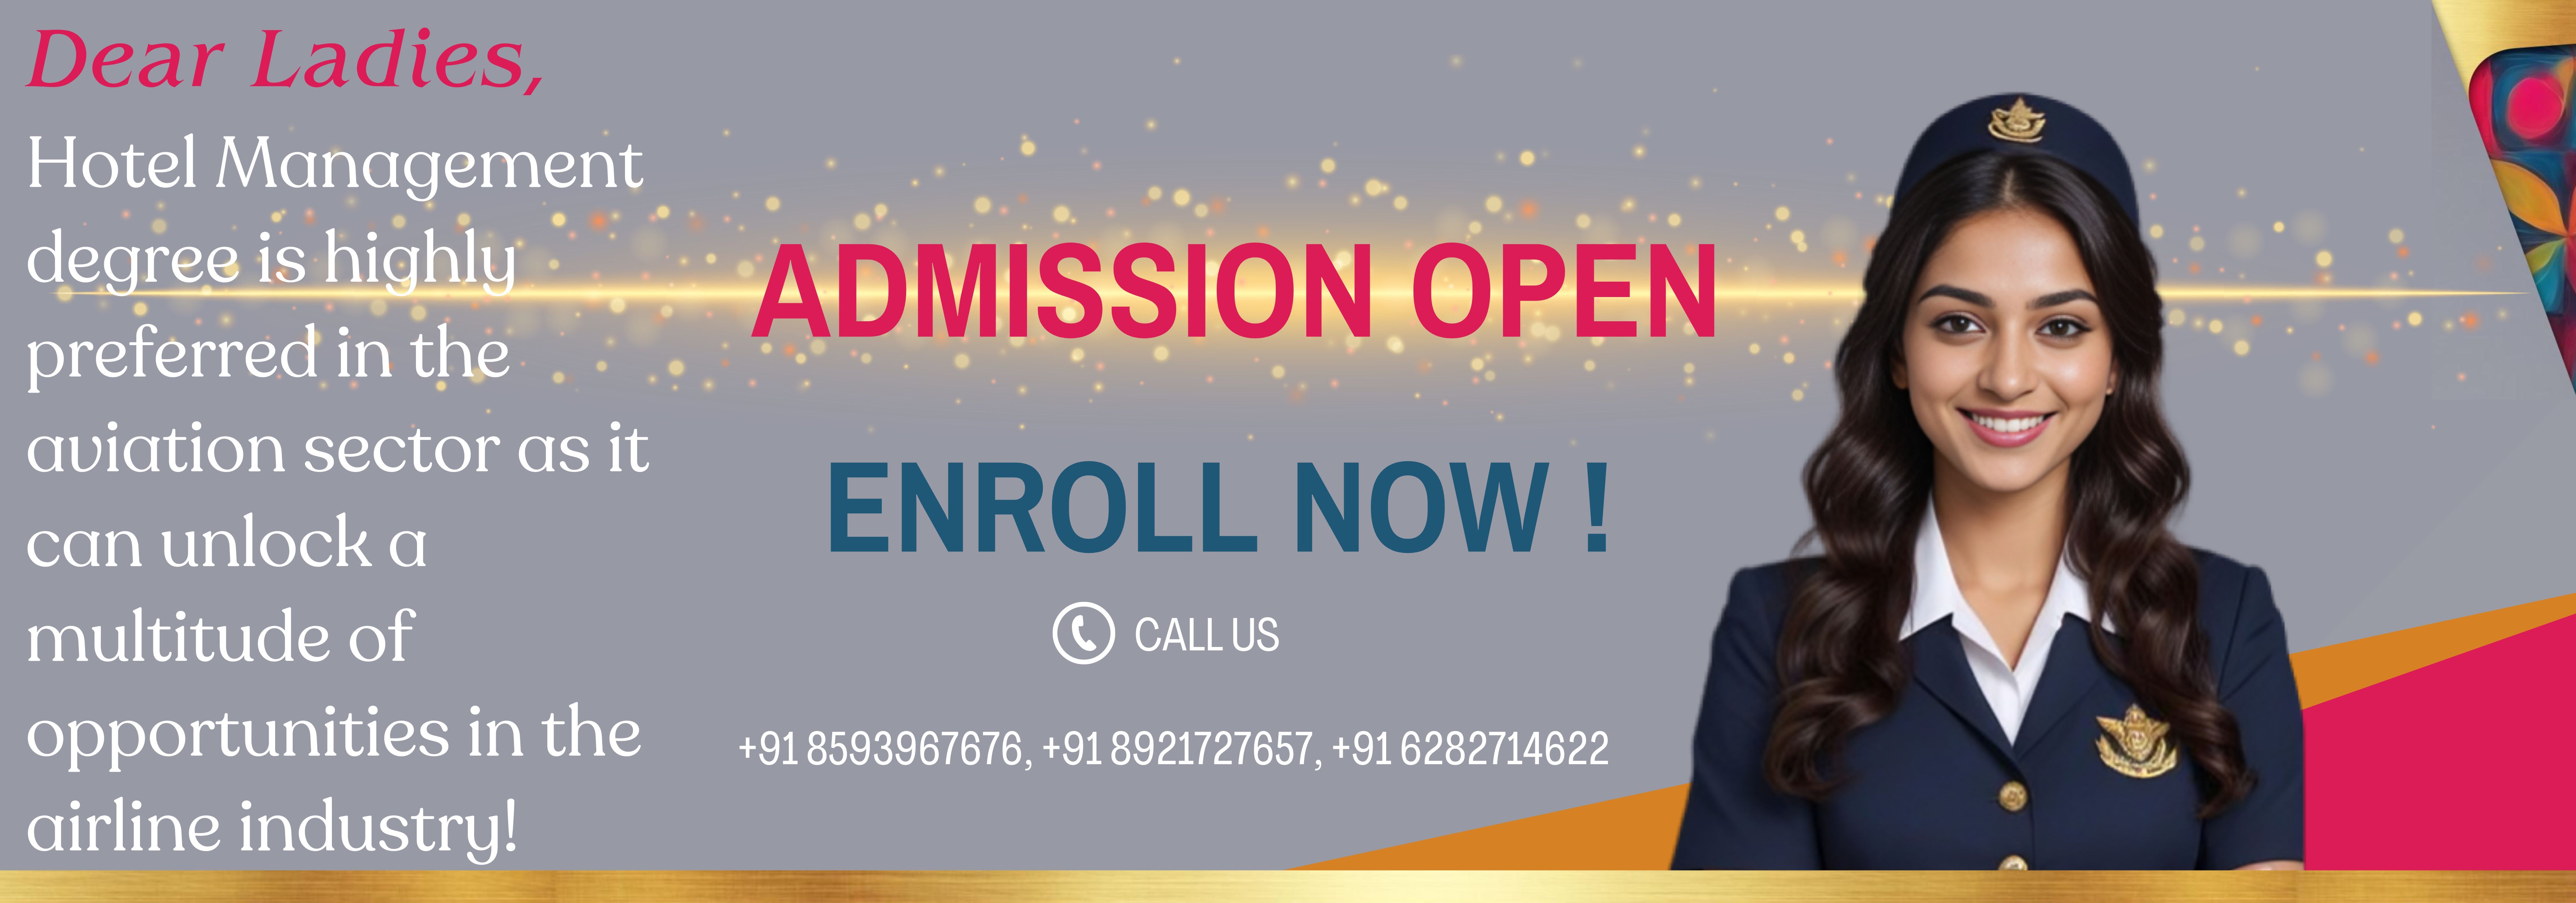 admission open (1)